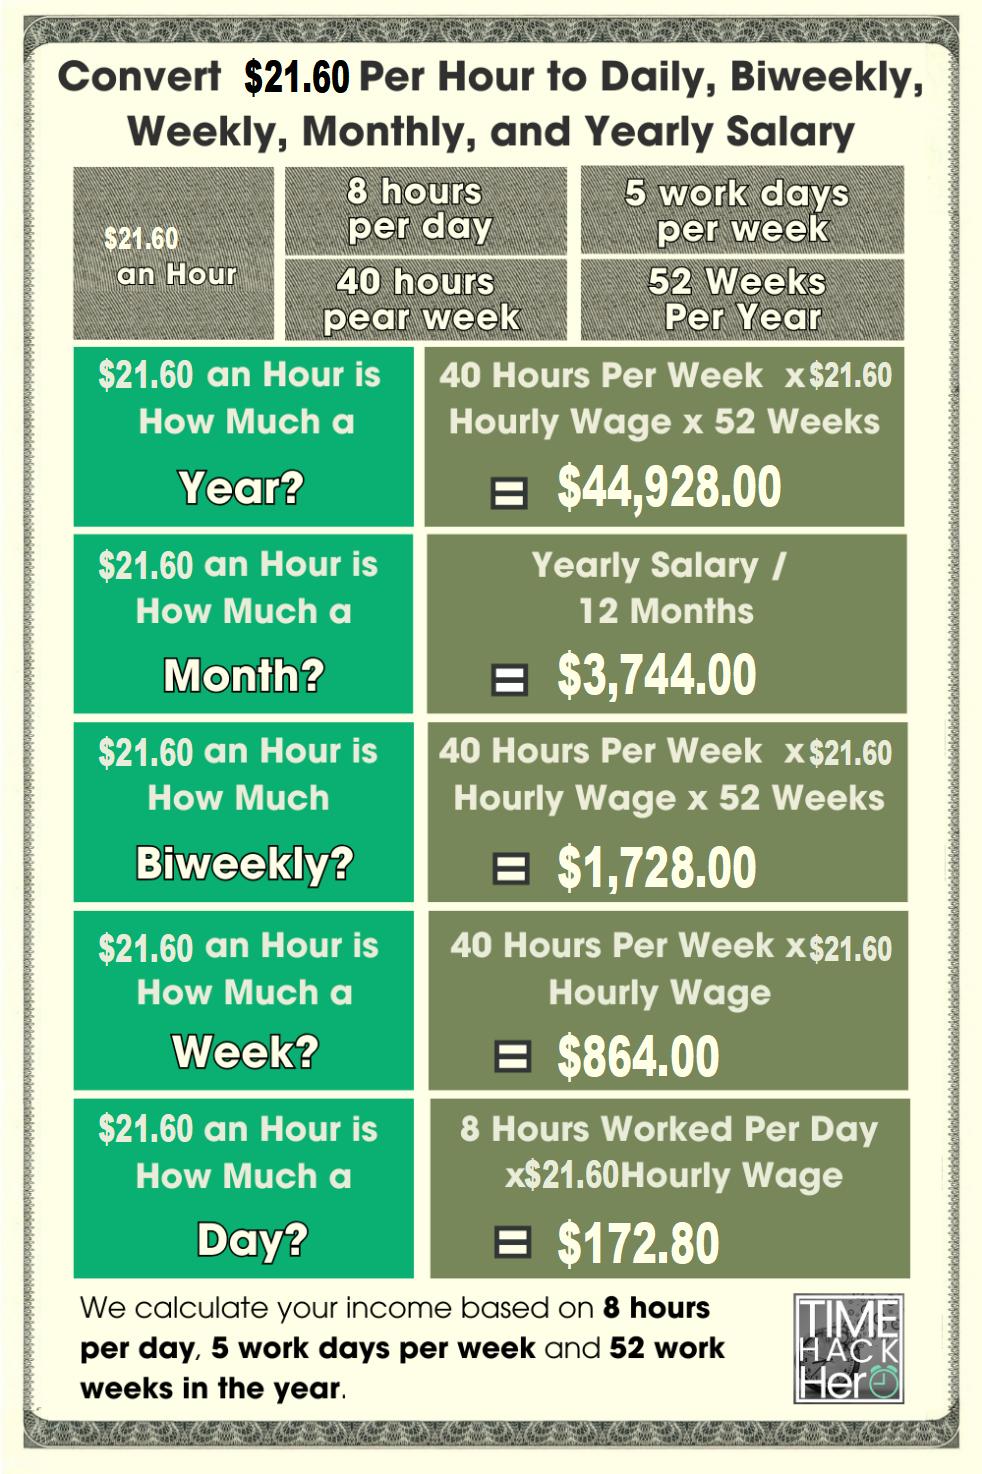 Convert $21.60 Per Hour to Weekly, Monthly, and Yearly Salary